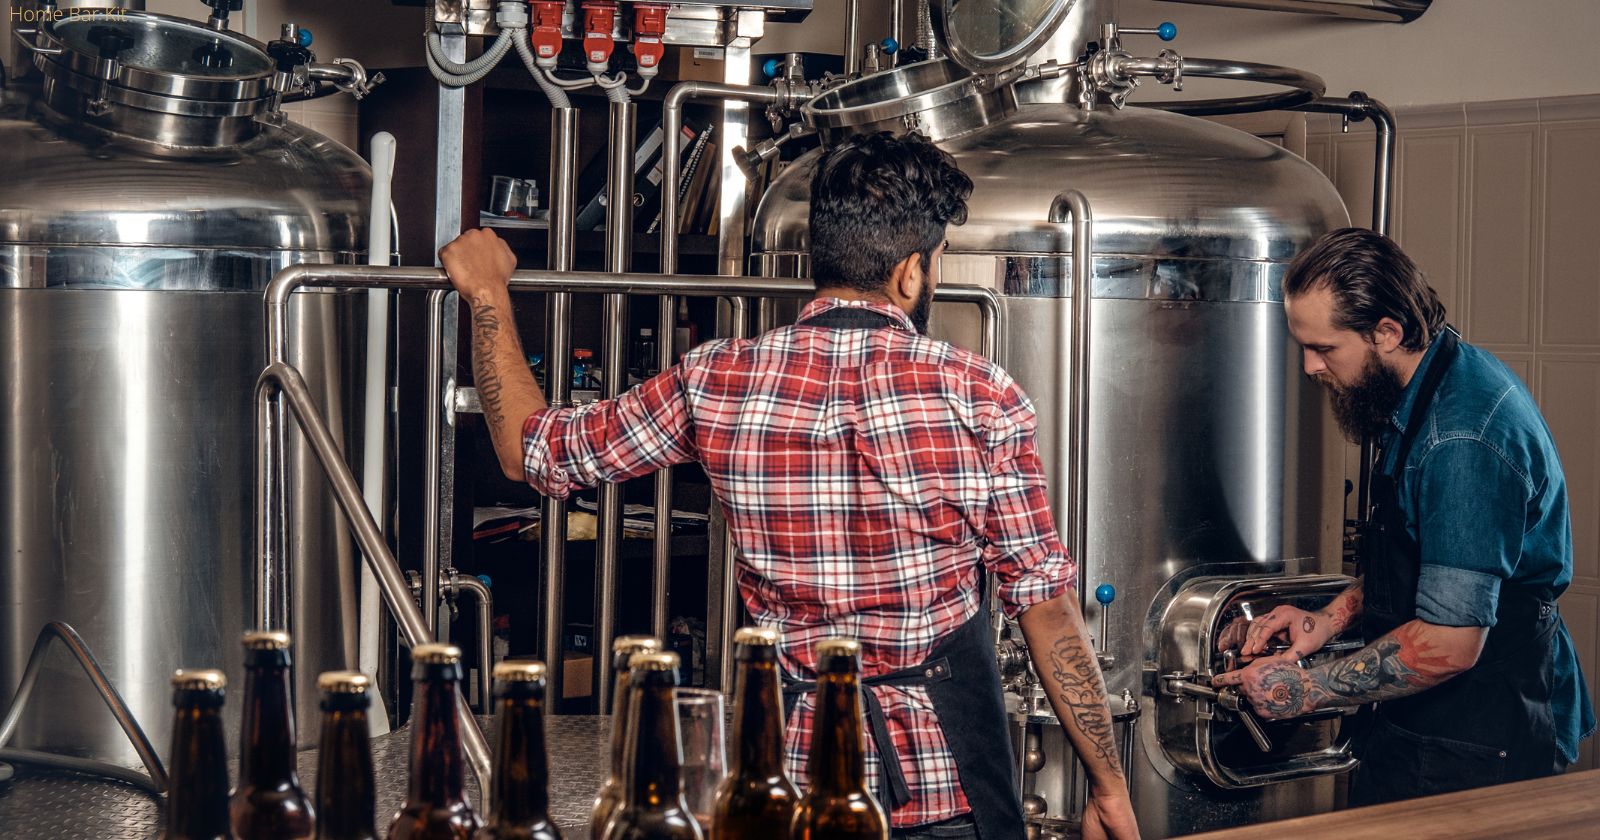 Is It Cheaper To Brew Beer Or Buy It